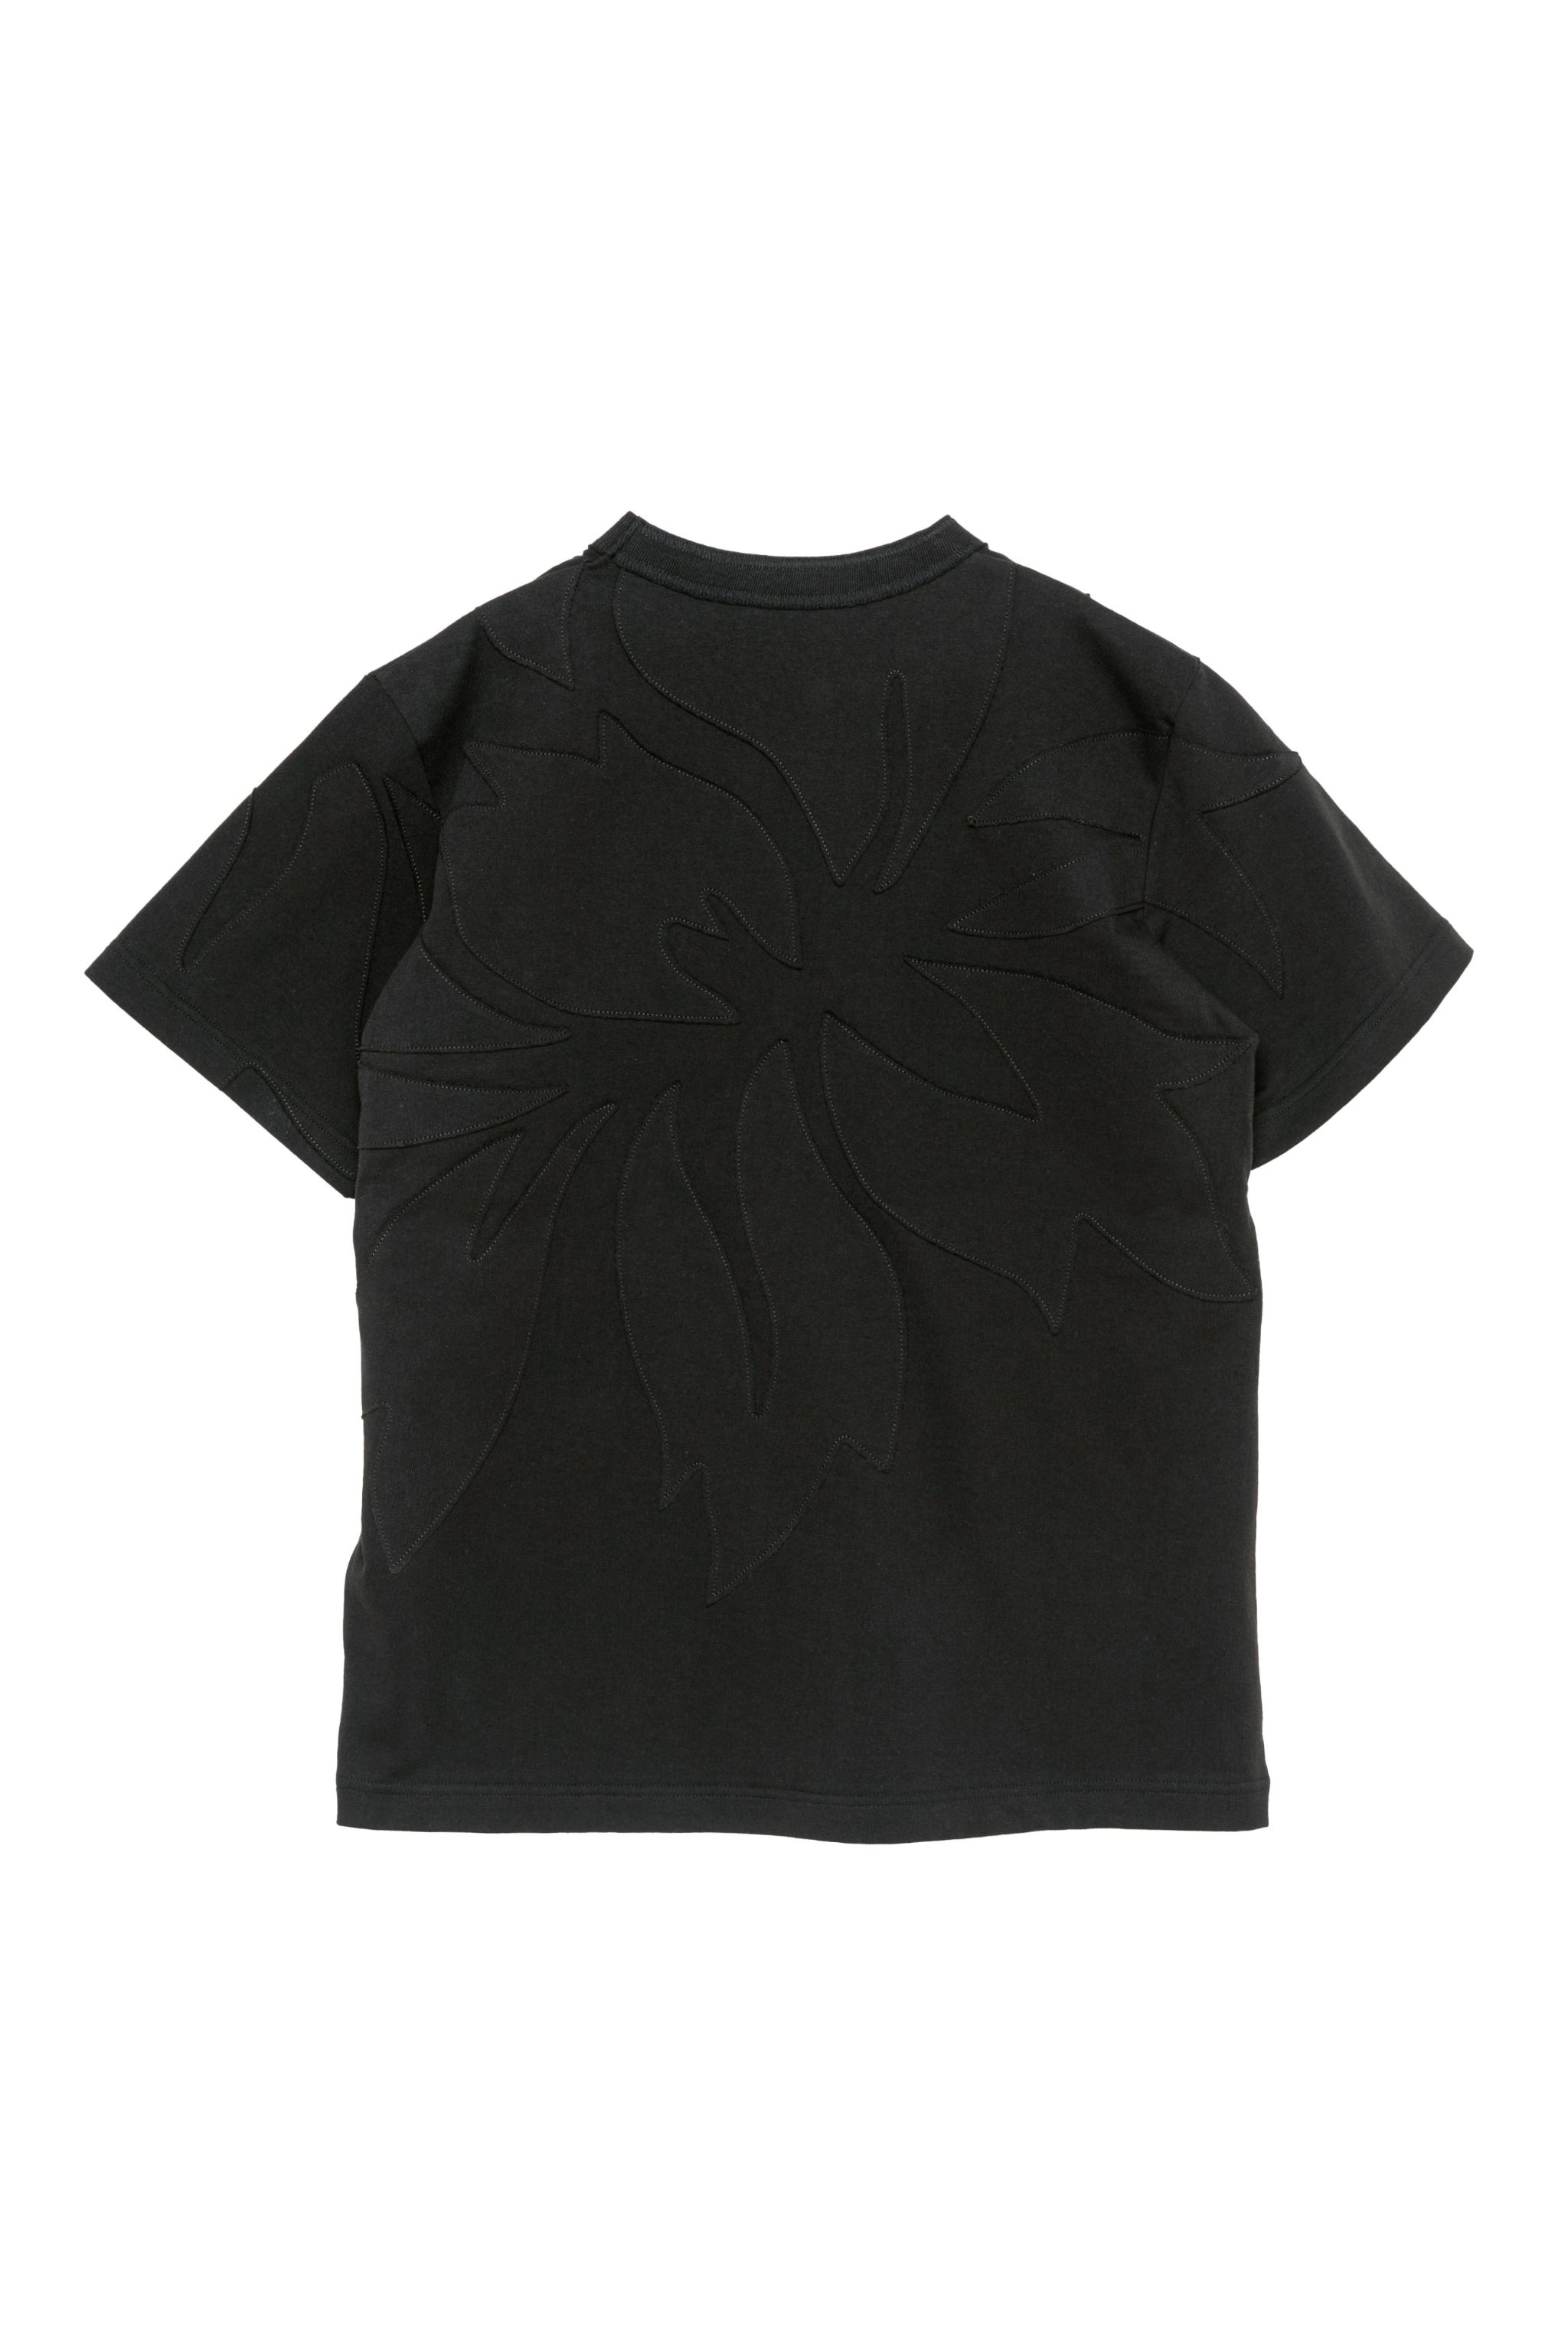 Floral Embroidered Patch T-Shirt - 3